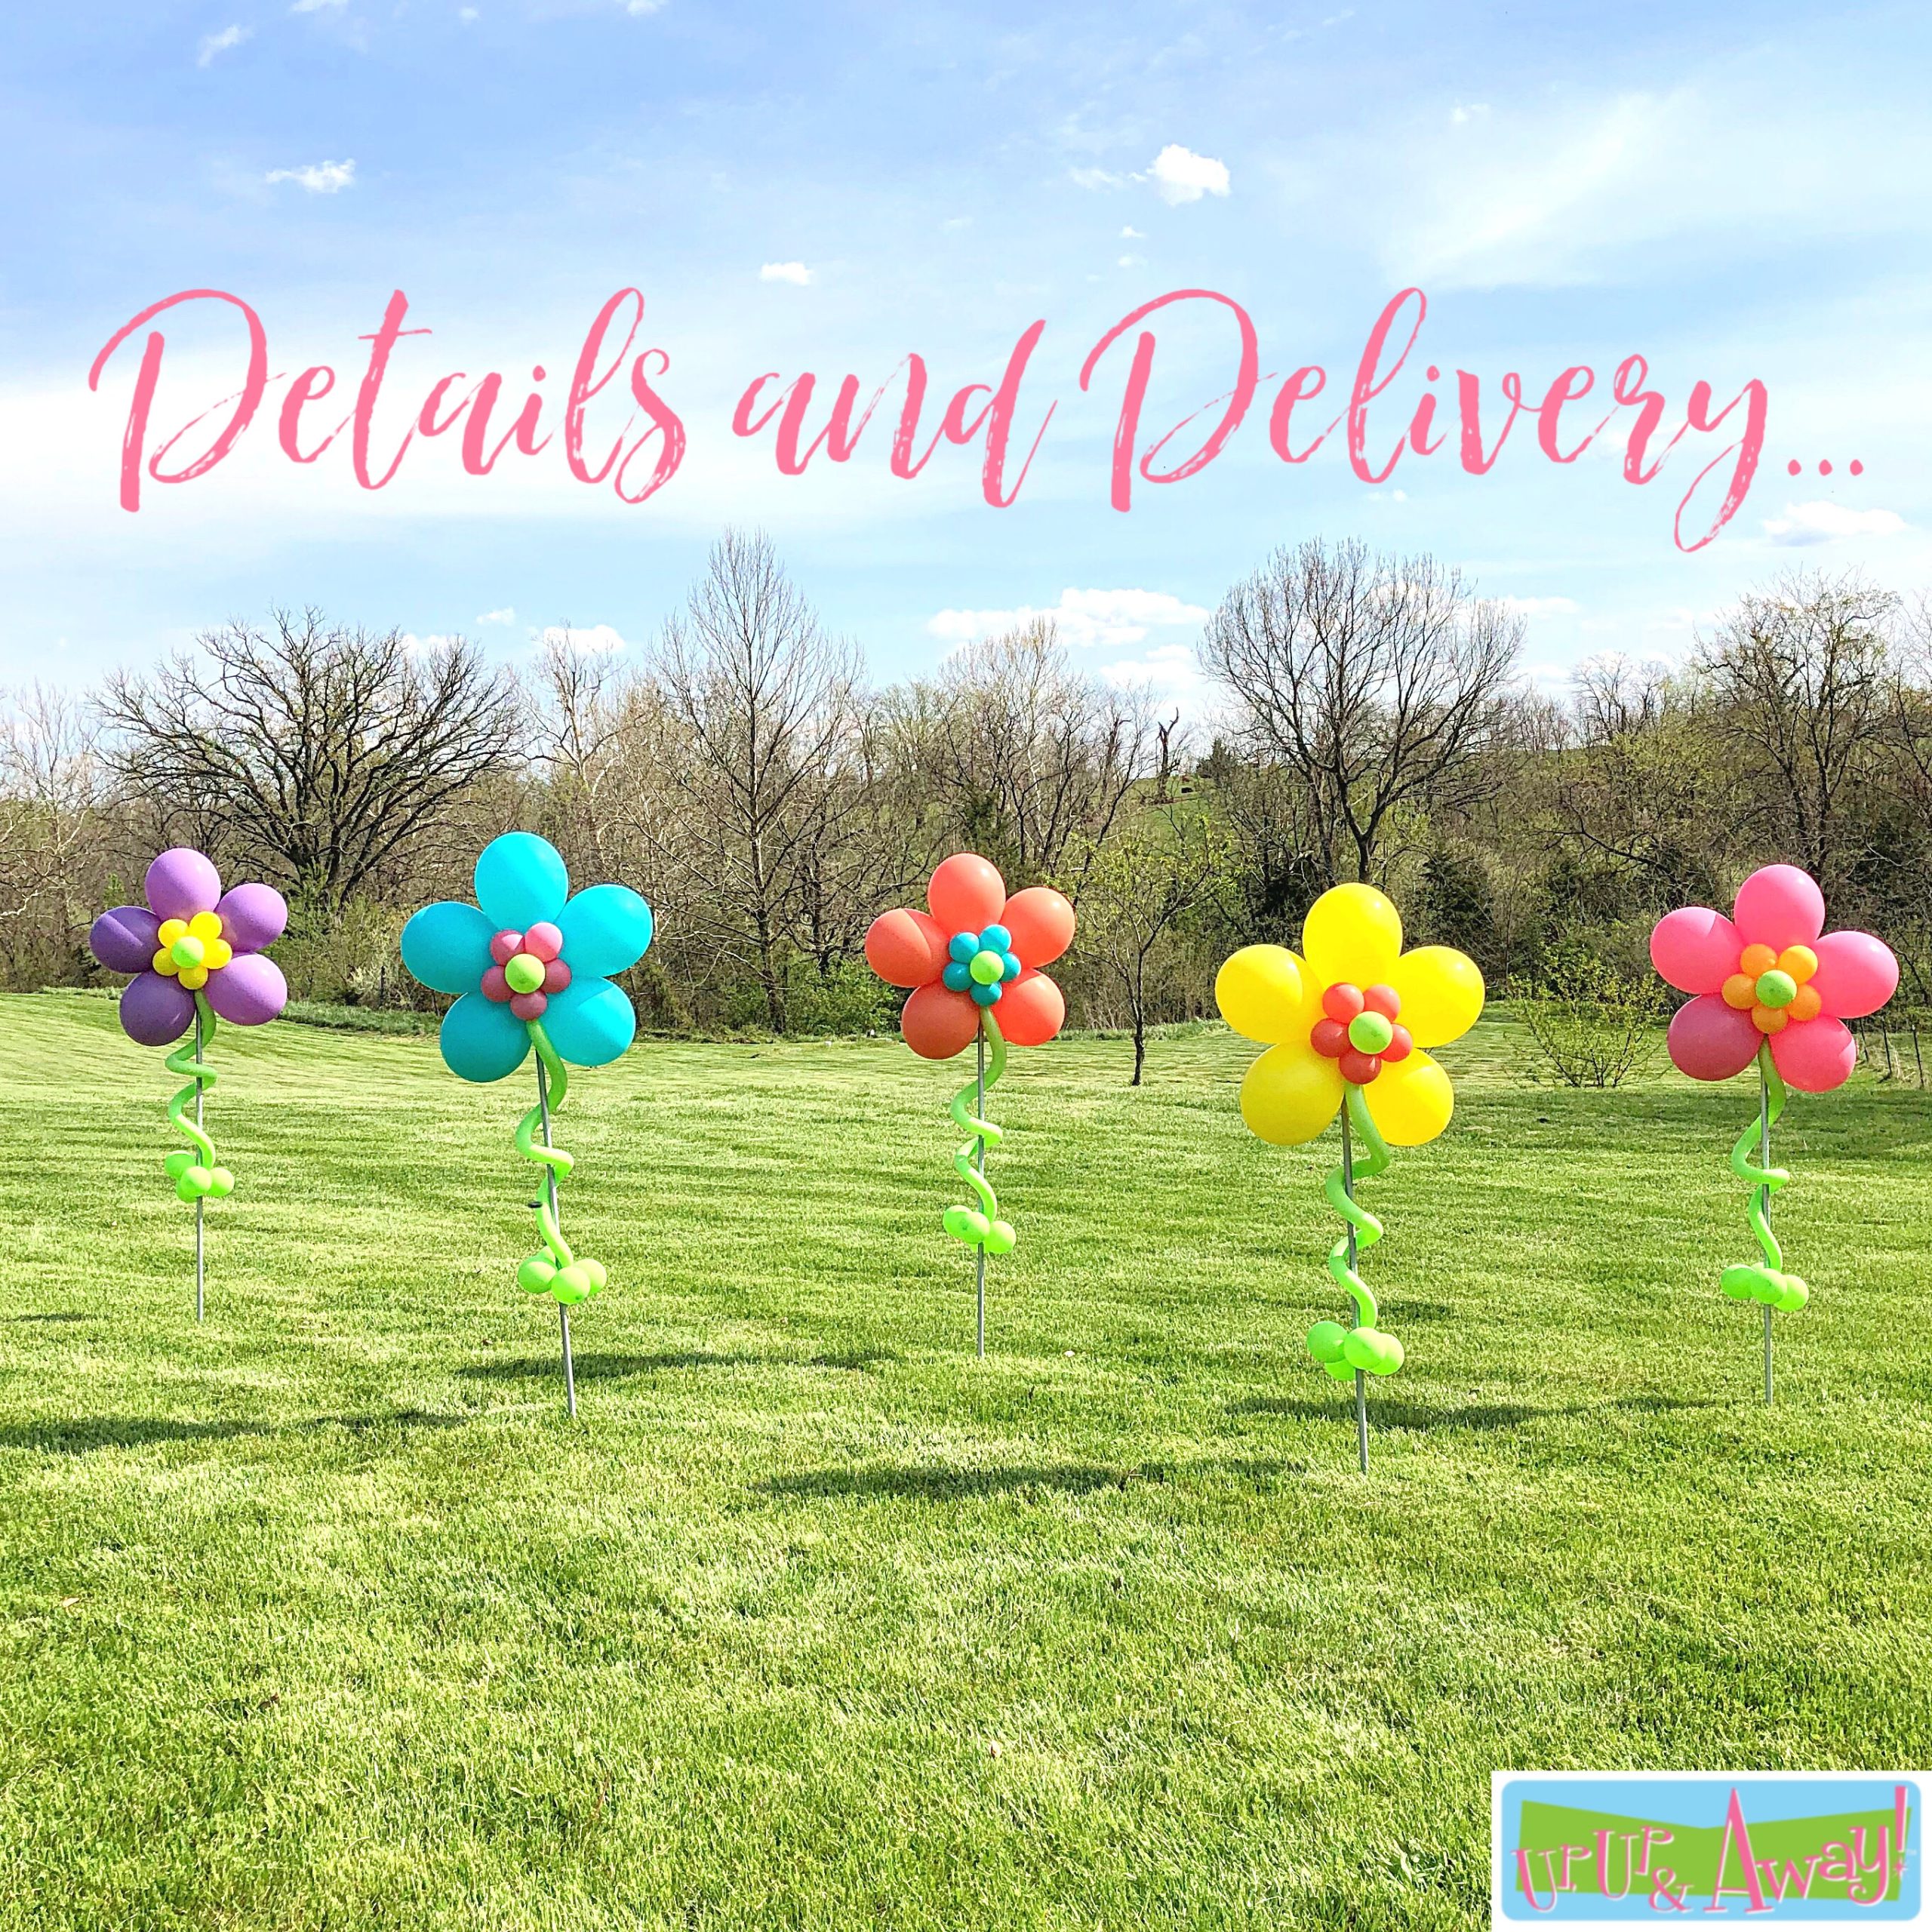 Details and Delivery | Up, Up & Away! Balloons